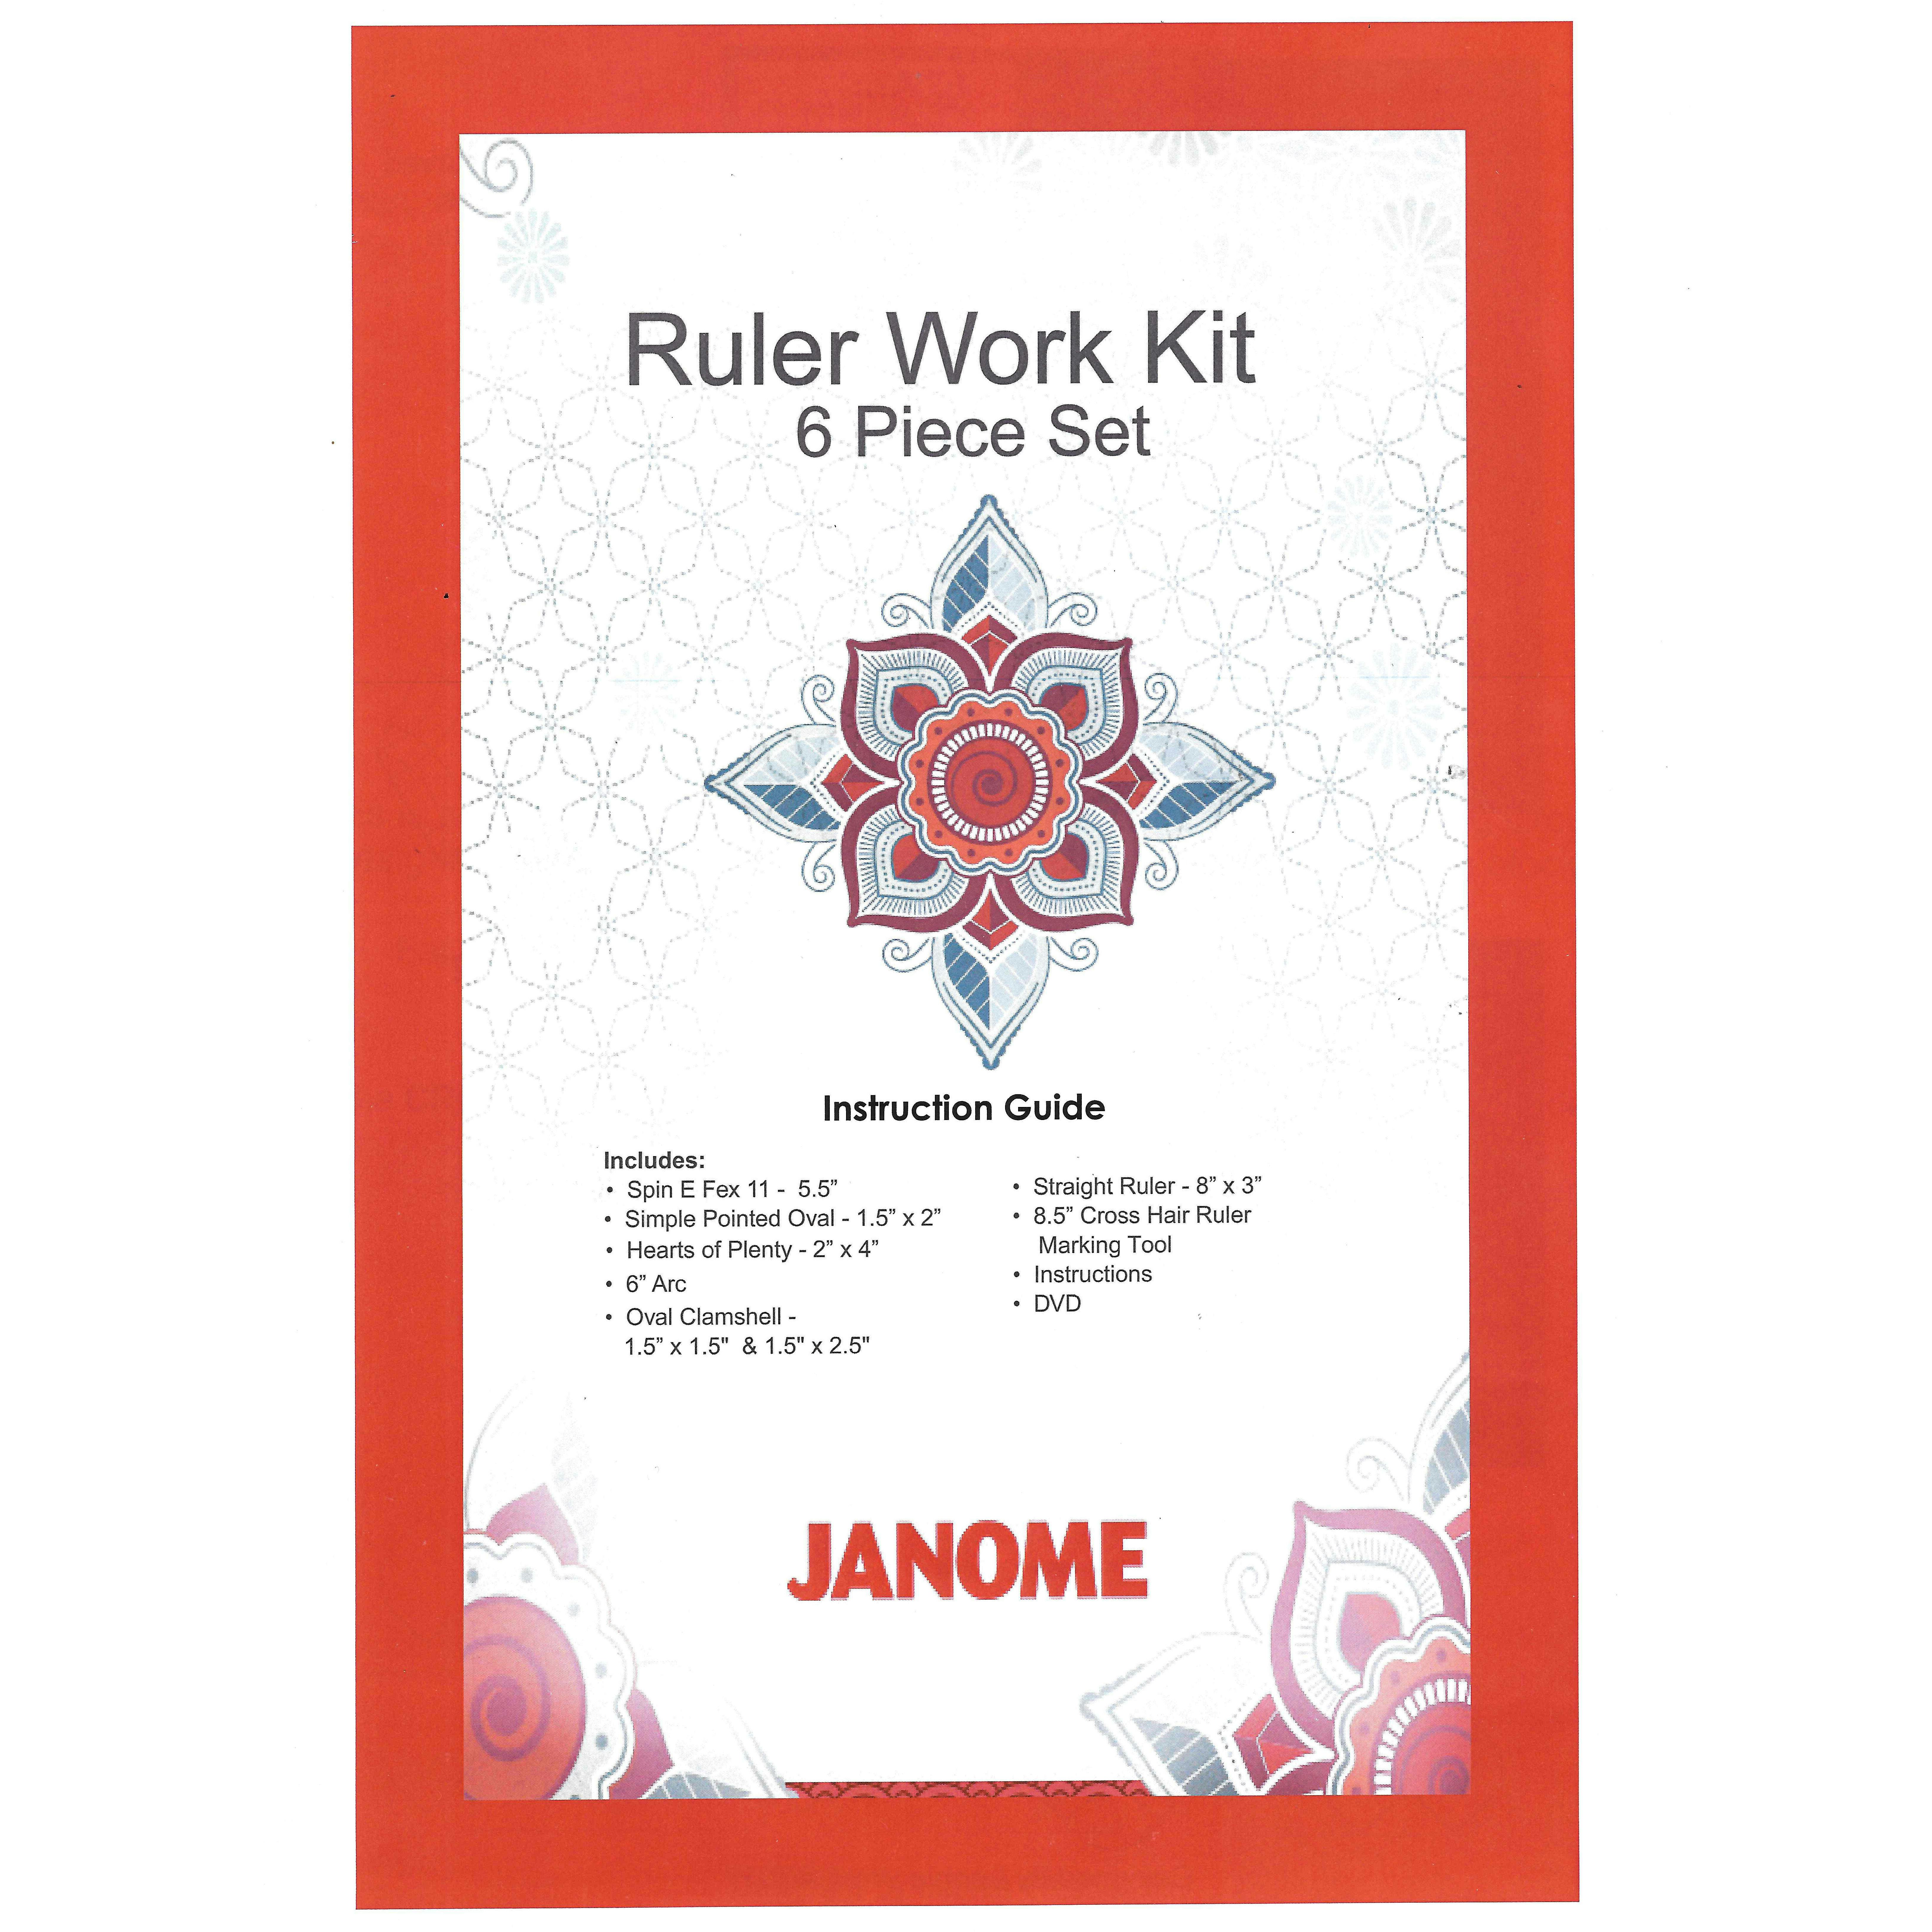 Quilt Ruler Upgrade Kit: Contents & Instructions